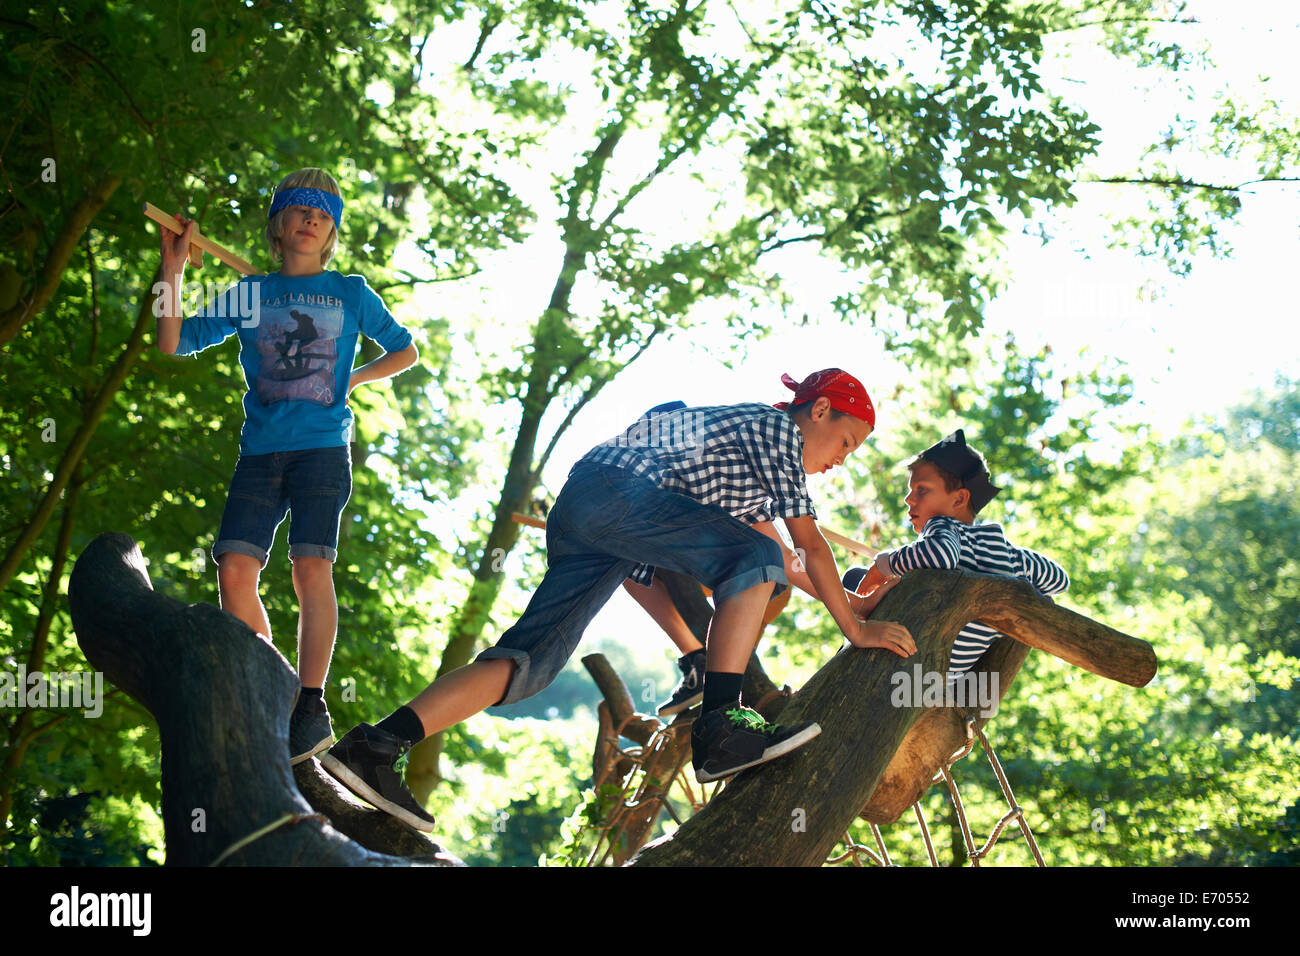 Young boys dressed as pirates, playing in tree Stock Photo